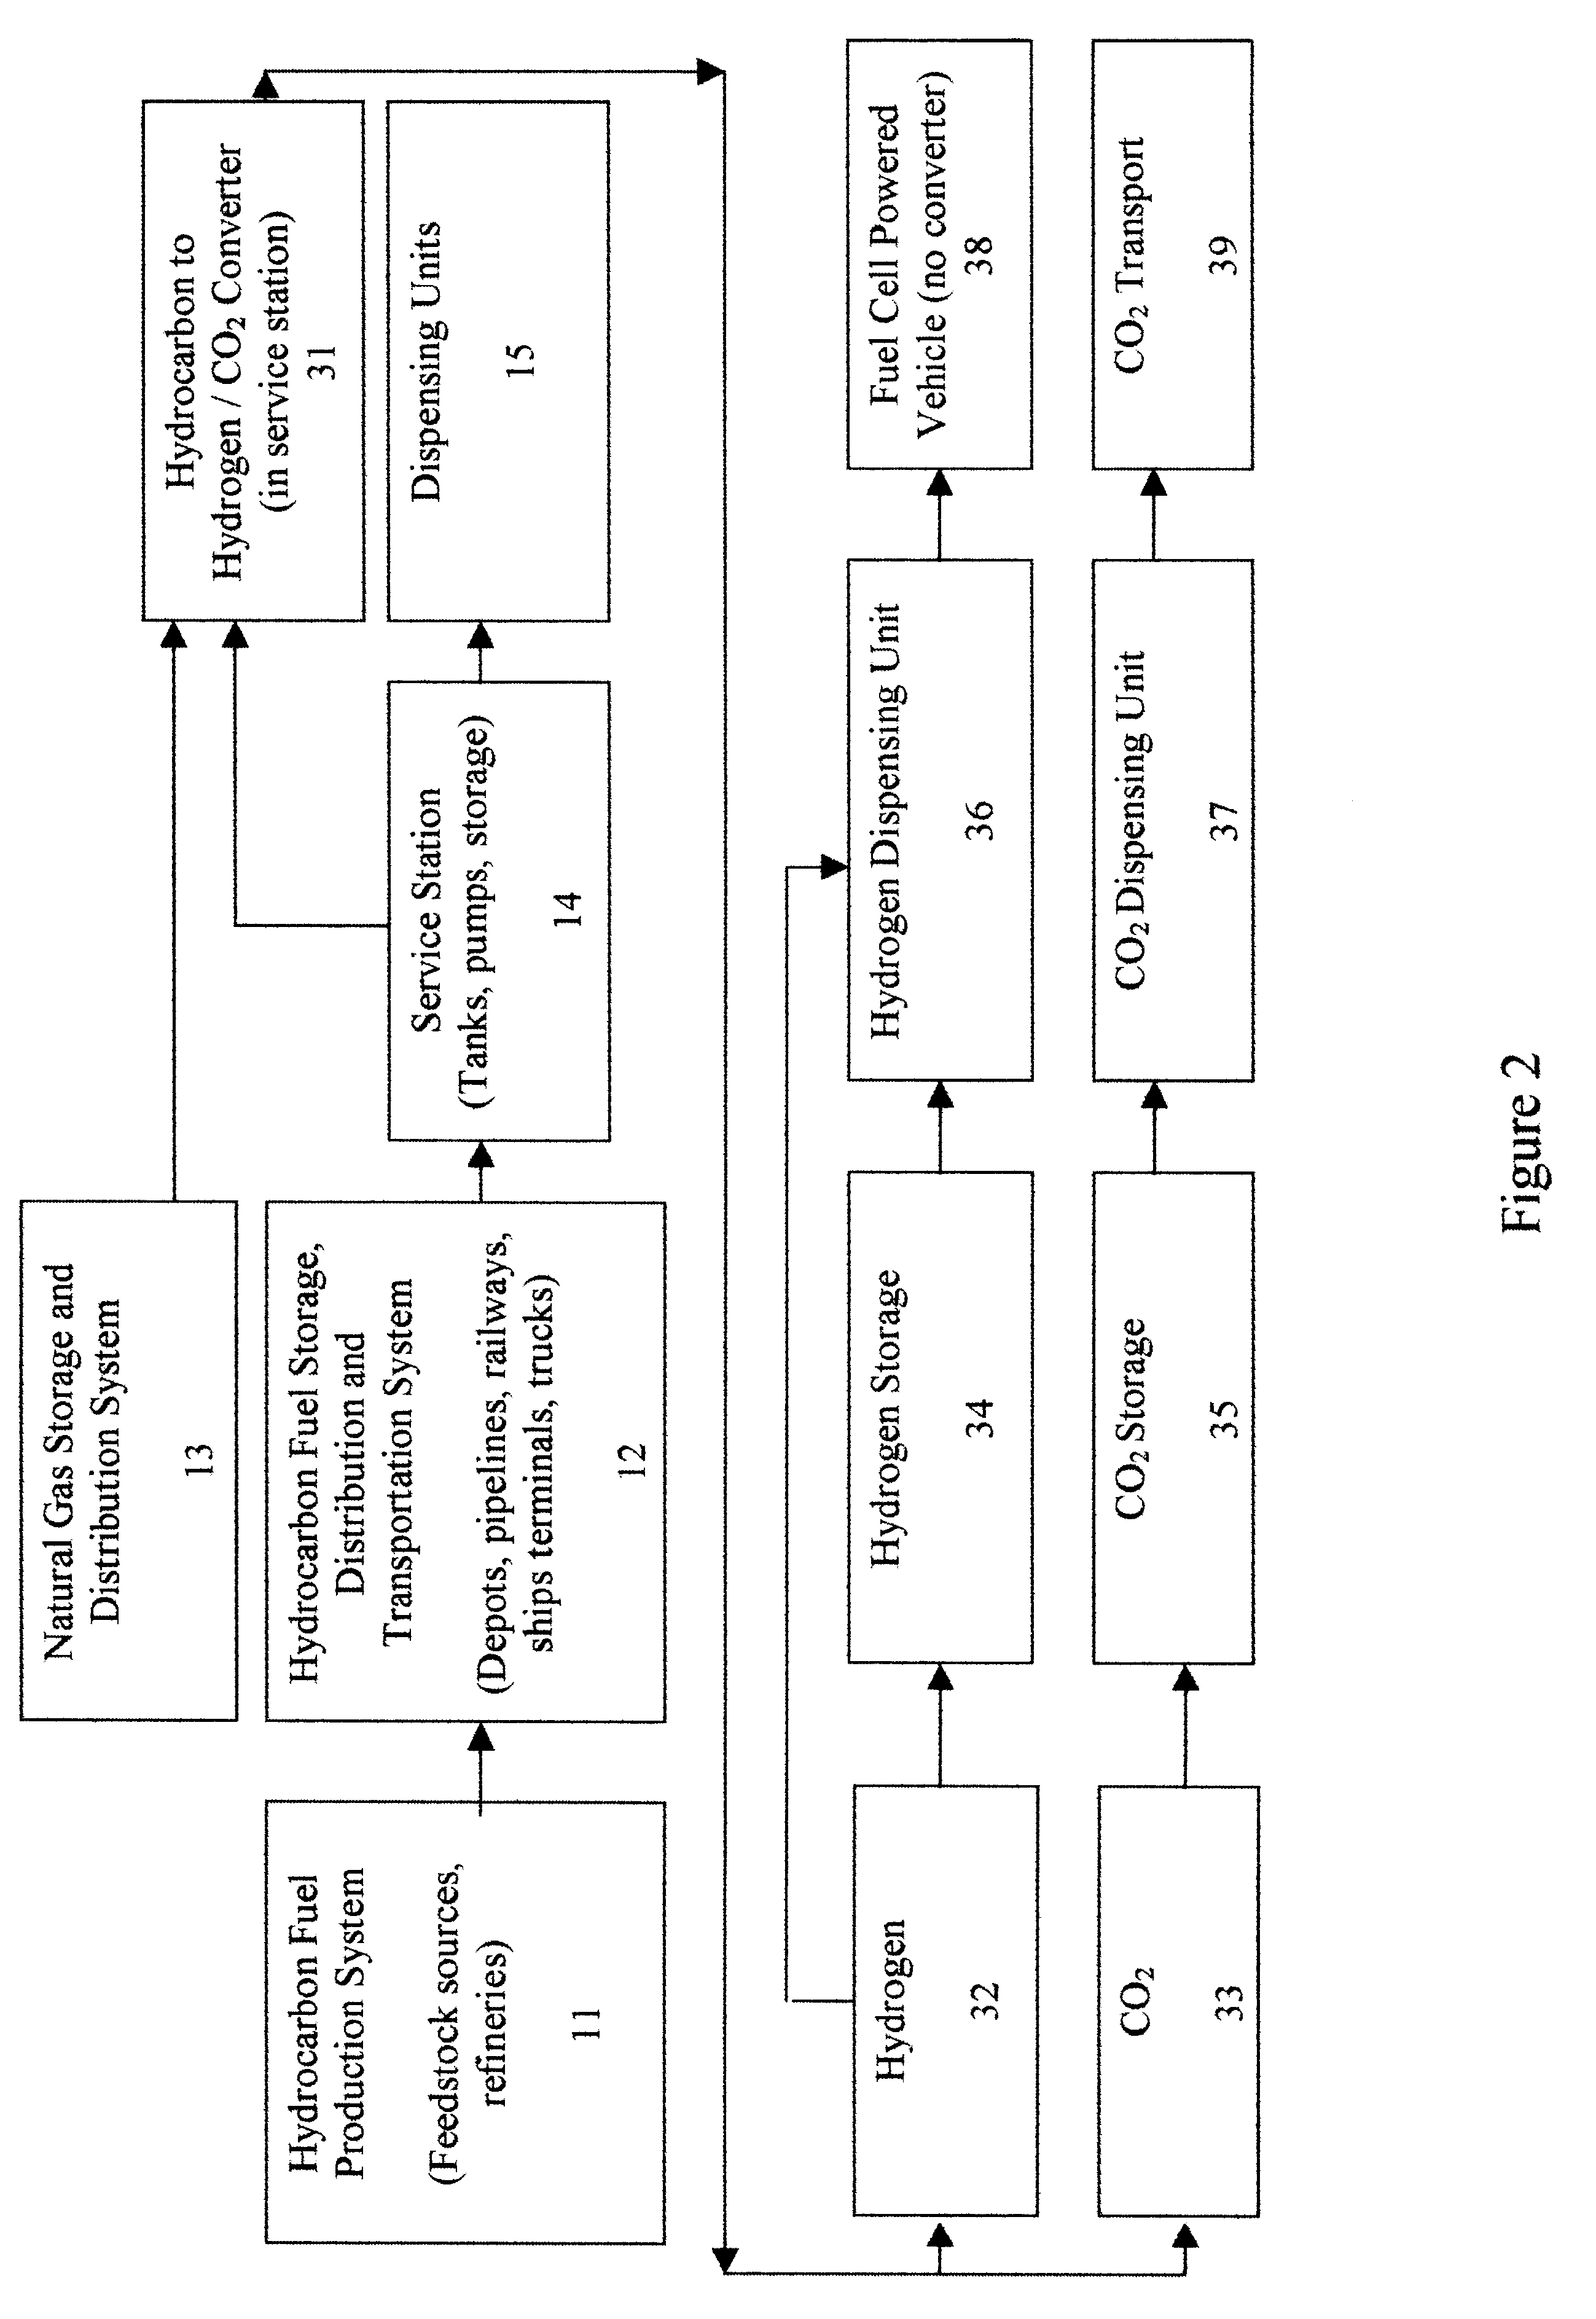 Apparatus and method for using the existing hydrocarbon distribution, storage and dispensing infrastructures for the production, distribution and dispensing of hydrogen